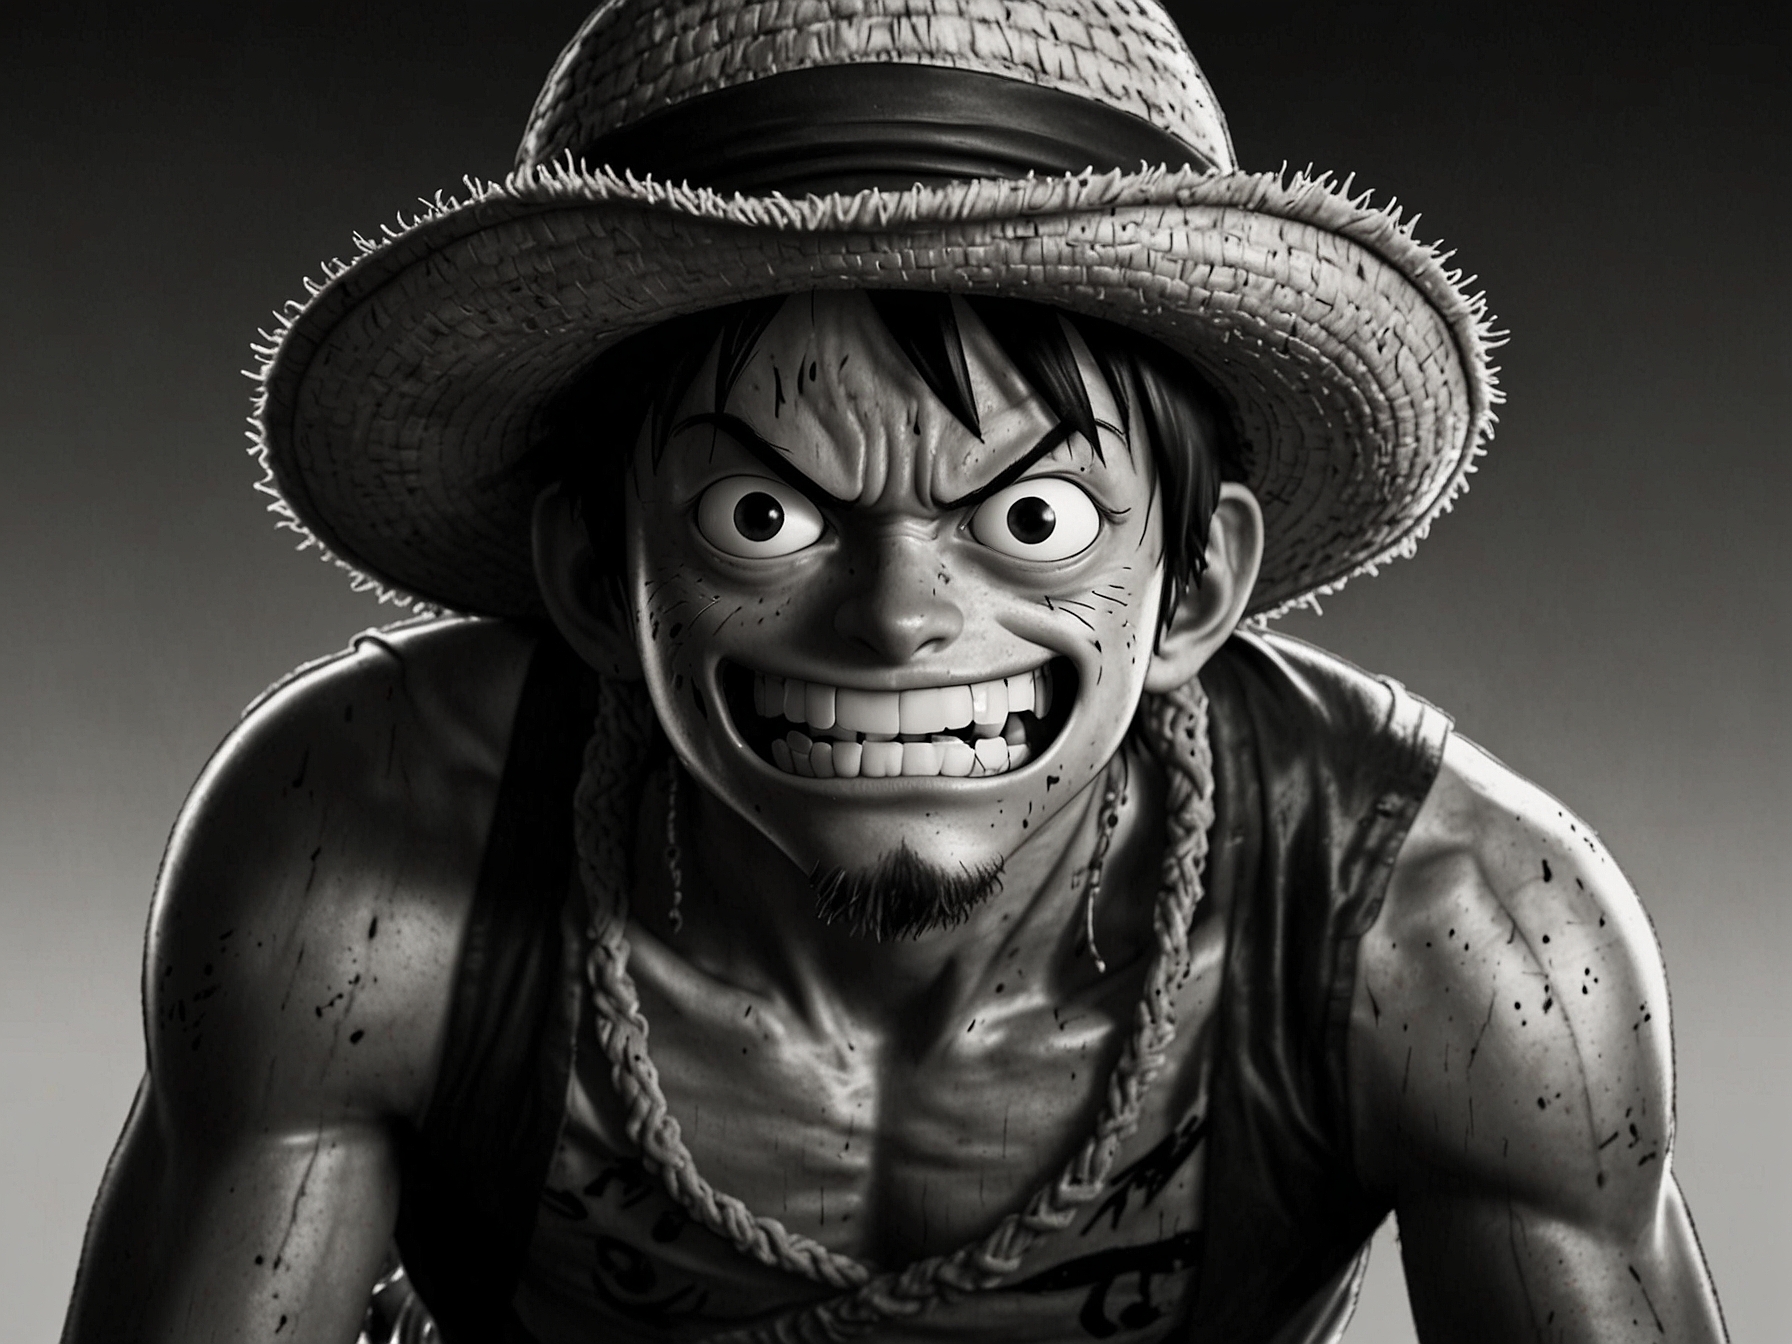 Luffy stands defiantly at the forefront, ready to face the Gorosei, who finally reveal themselves. Each elder displays a unique and formidable presence, setting the stage for the intense battle ahead.